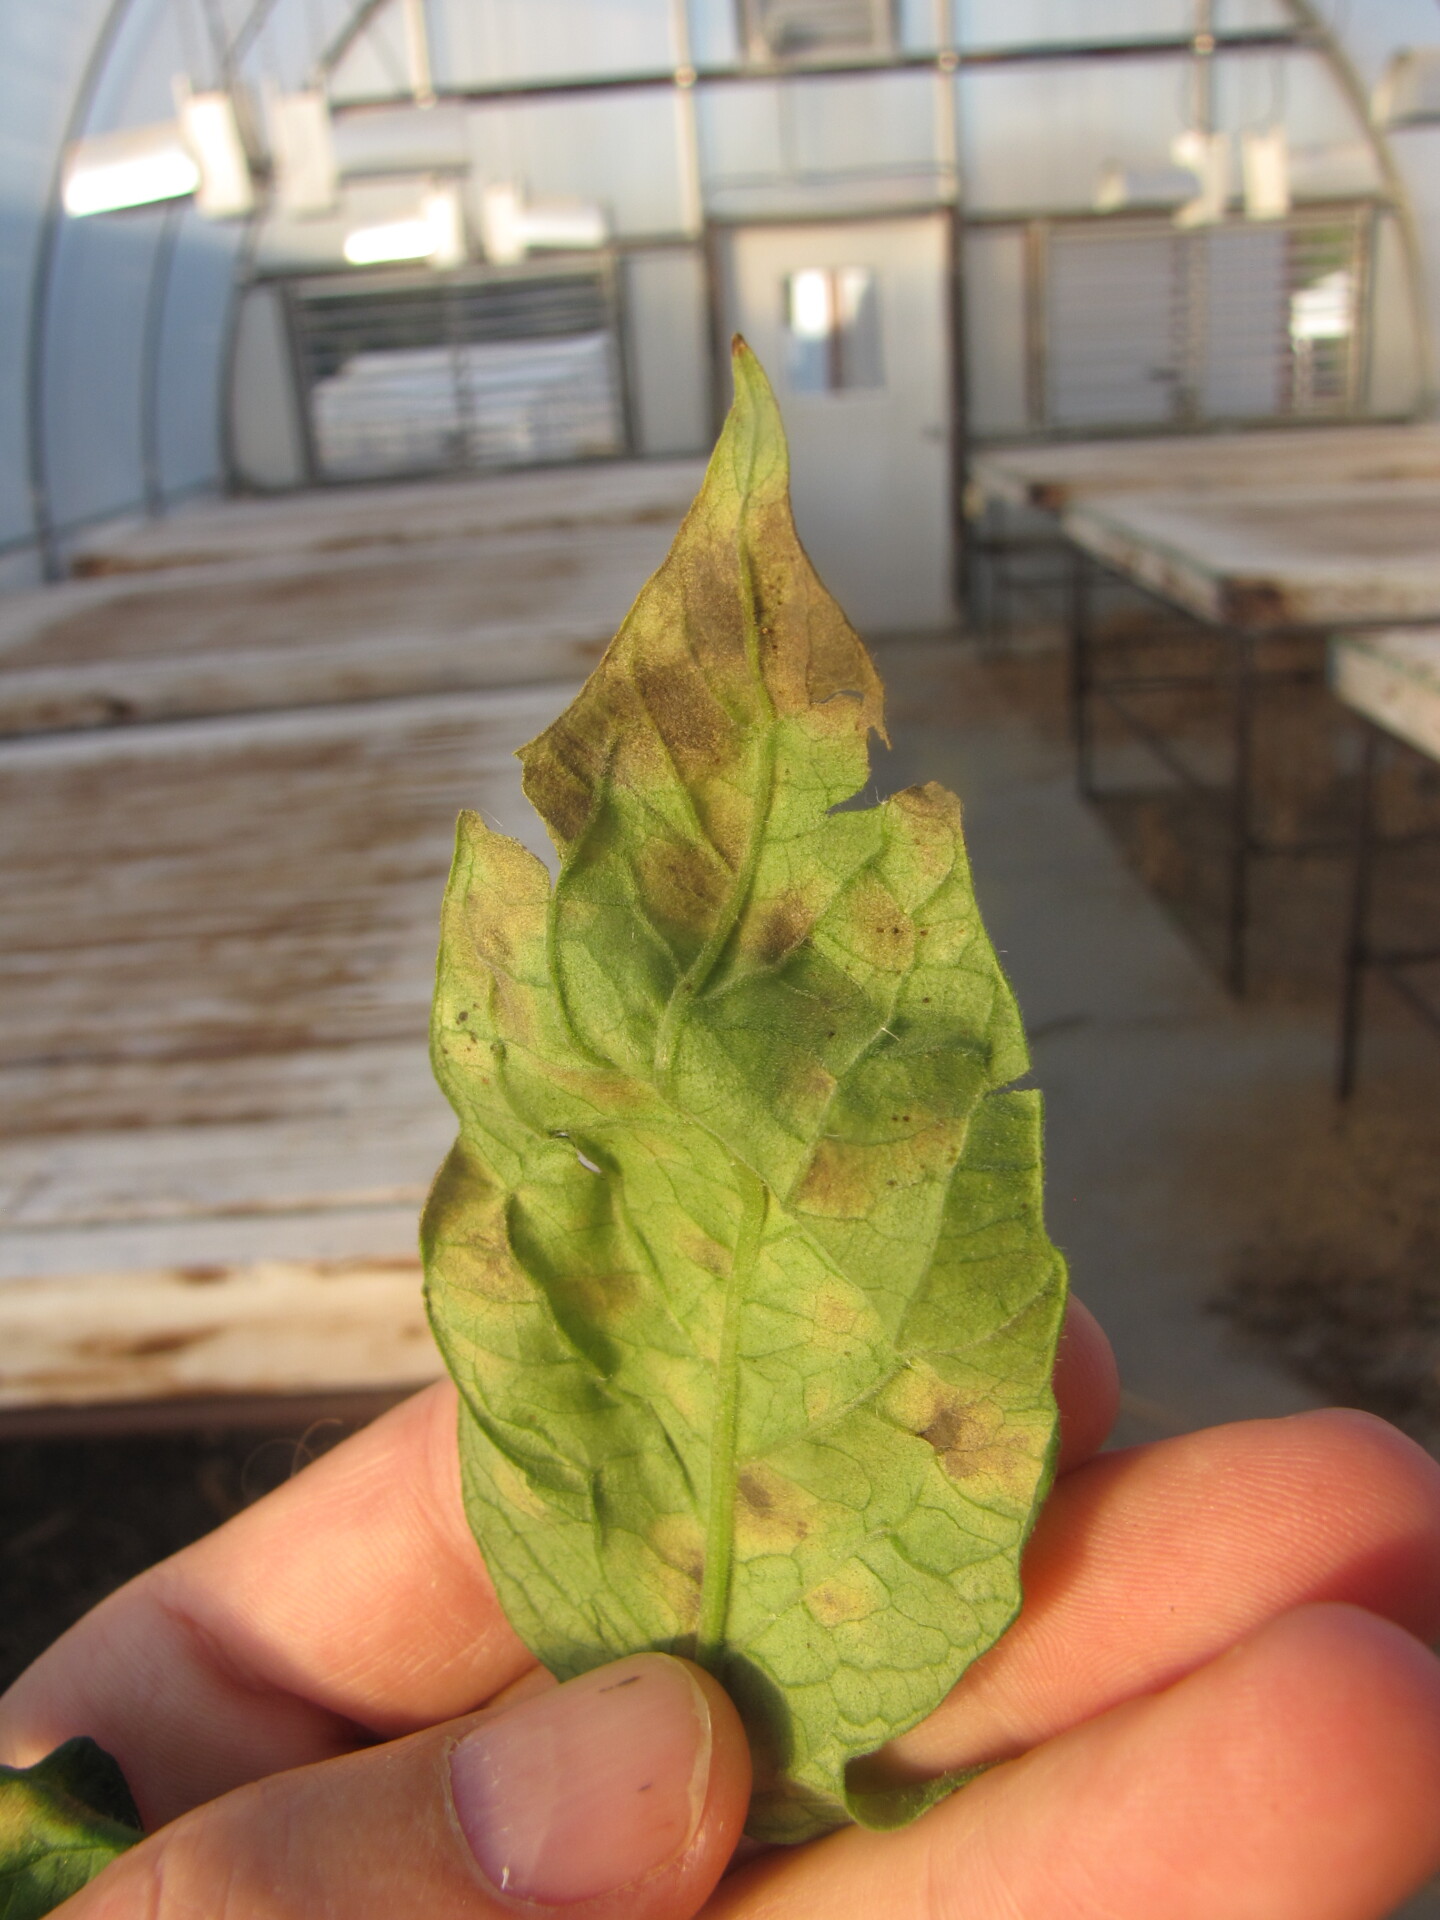 Figure 2. Underside of tomato leaf with Cercospora leaf mold. Note dark sporulation of pathogen and compare with leaf mold of tomato.